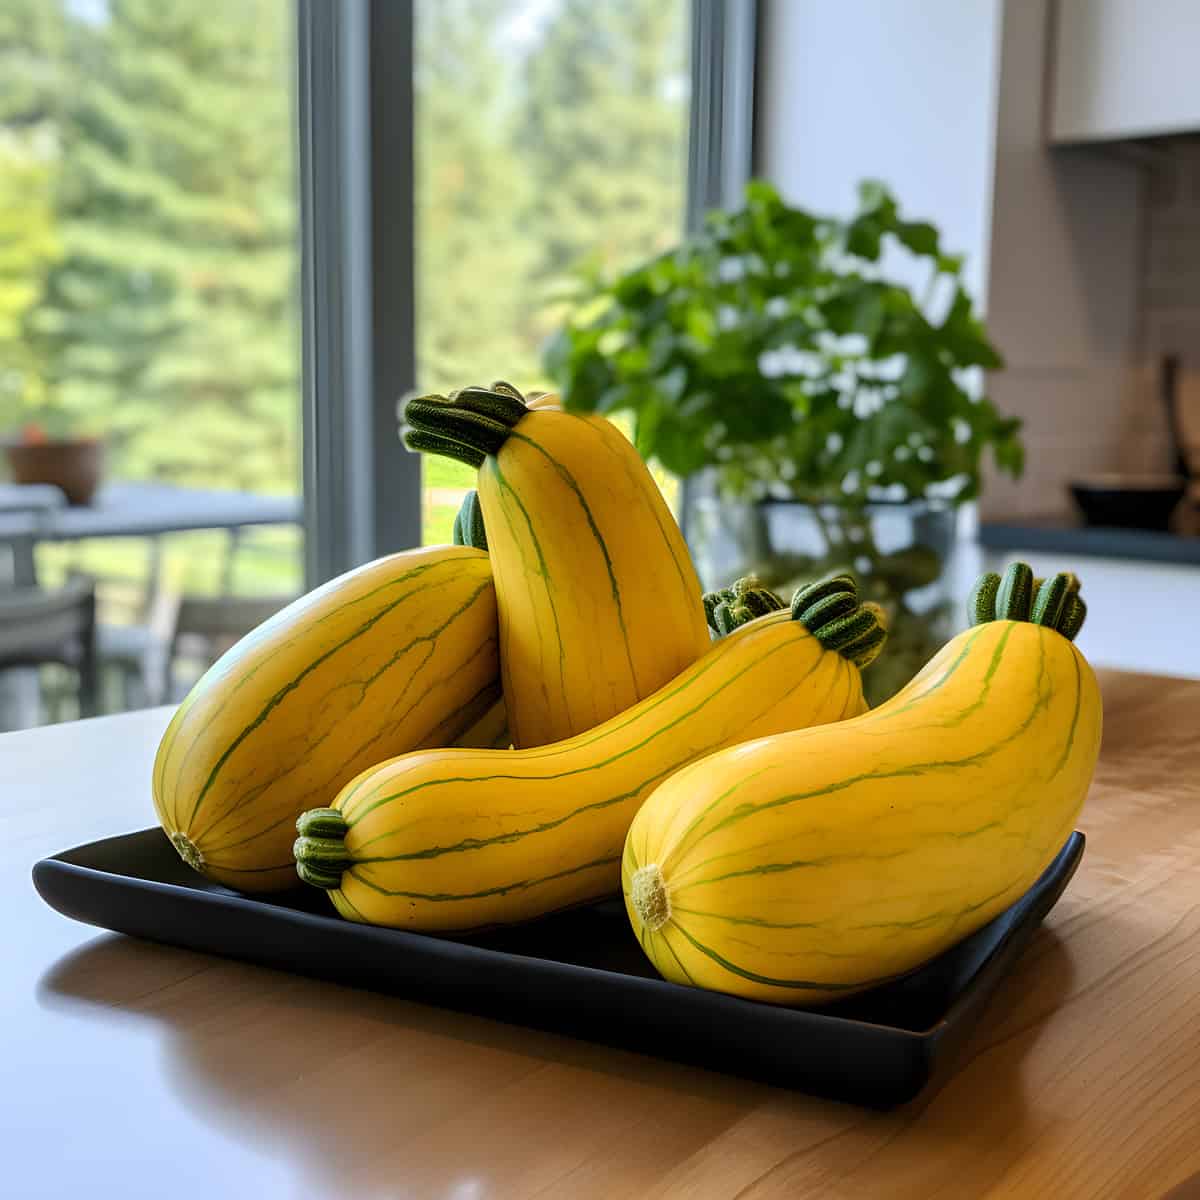 Early Prolific Straightneck Squash on a kitchen counter